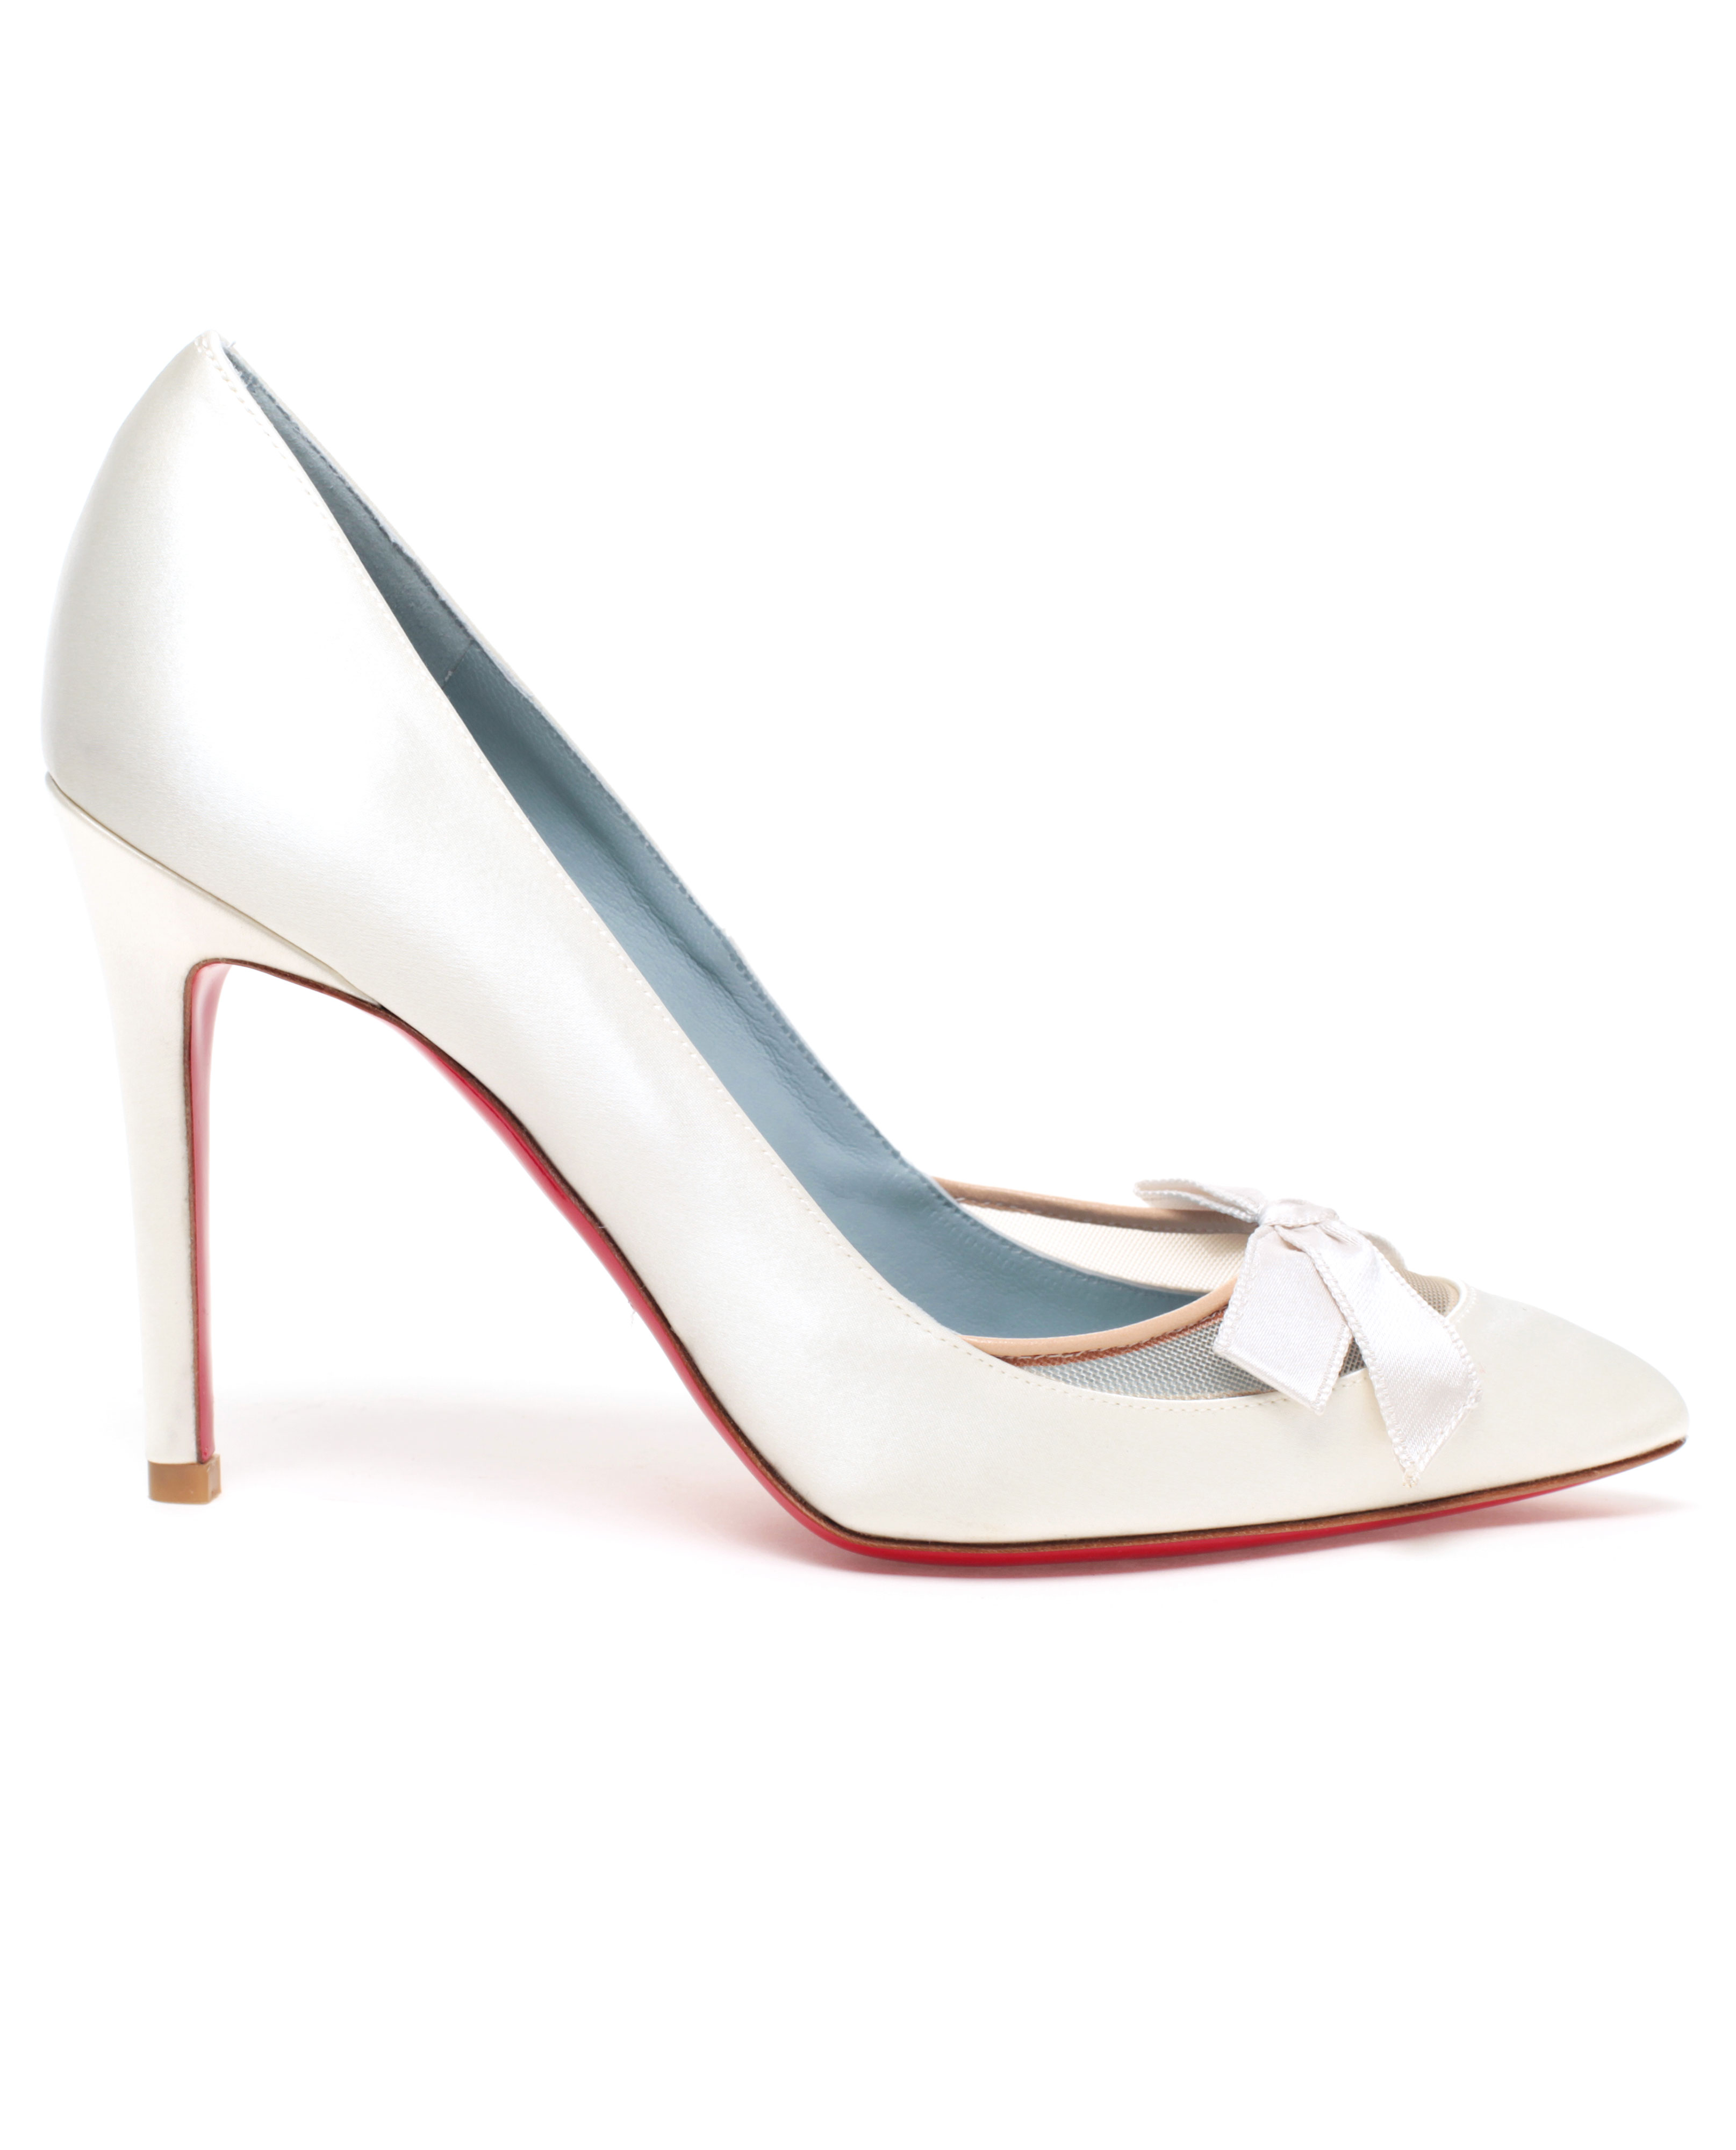 83 Confortable White bridal white louboutin wedding shoes for Happy New year